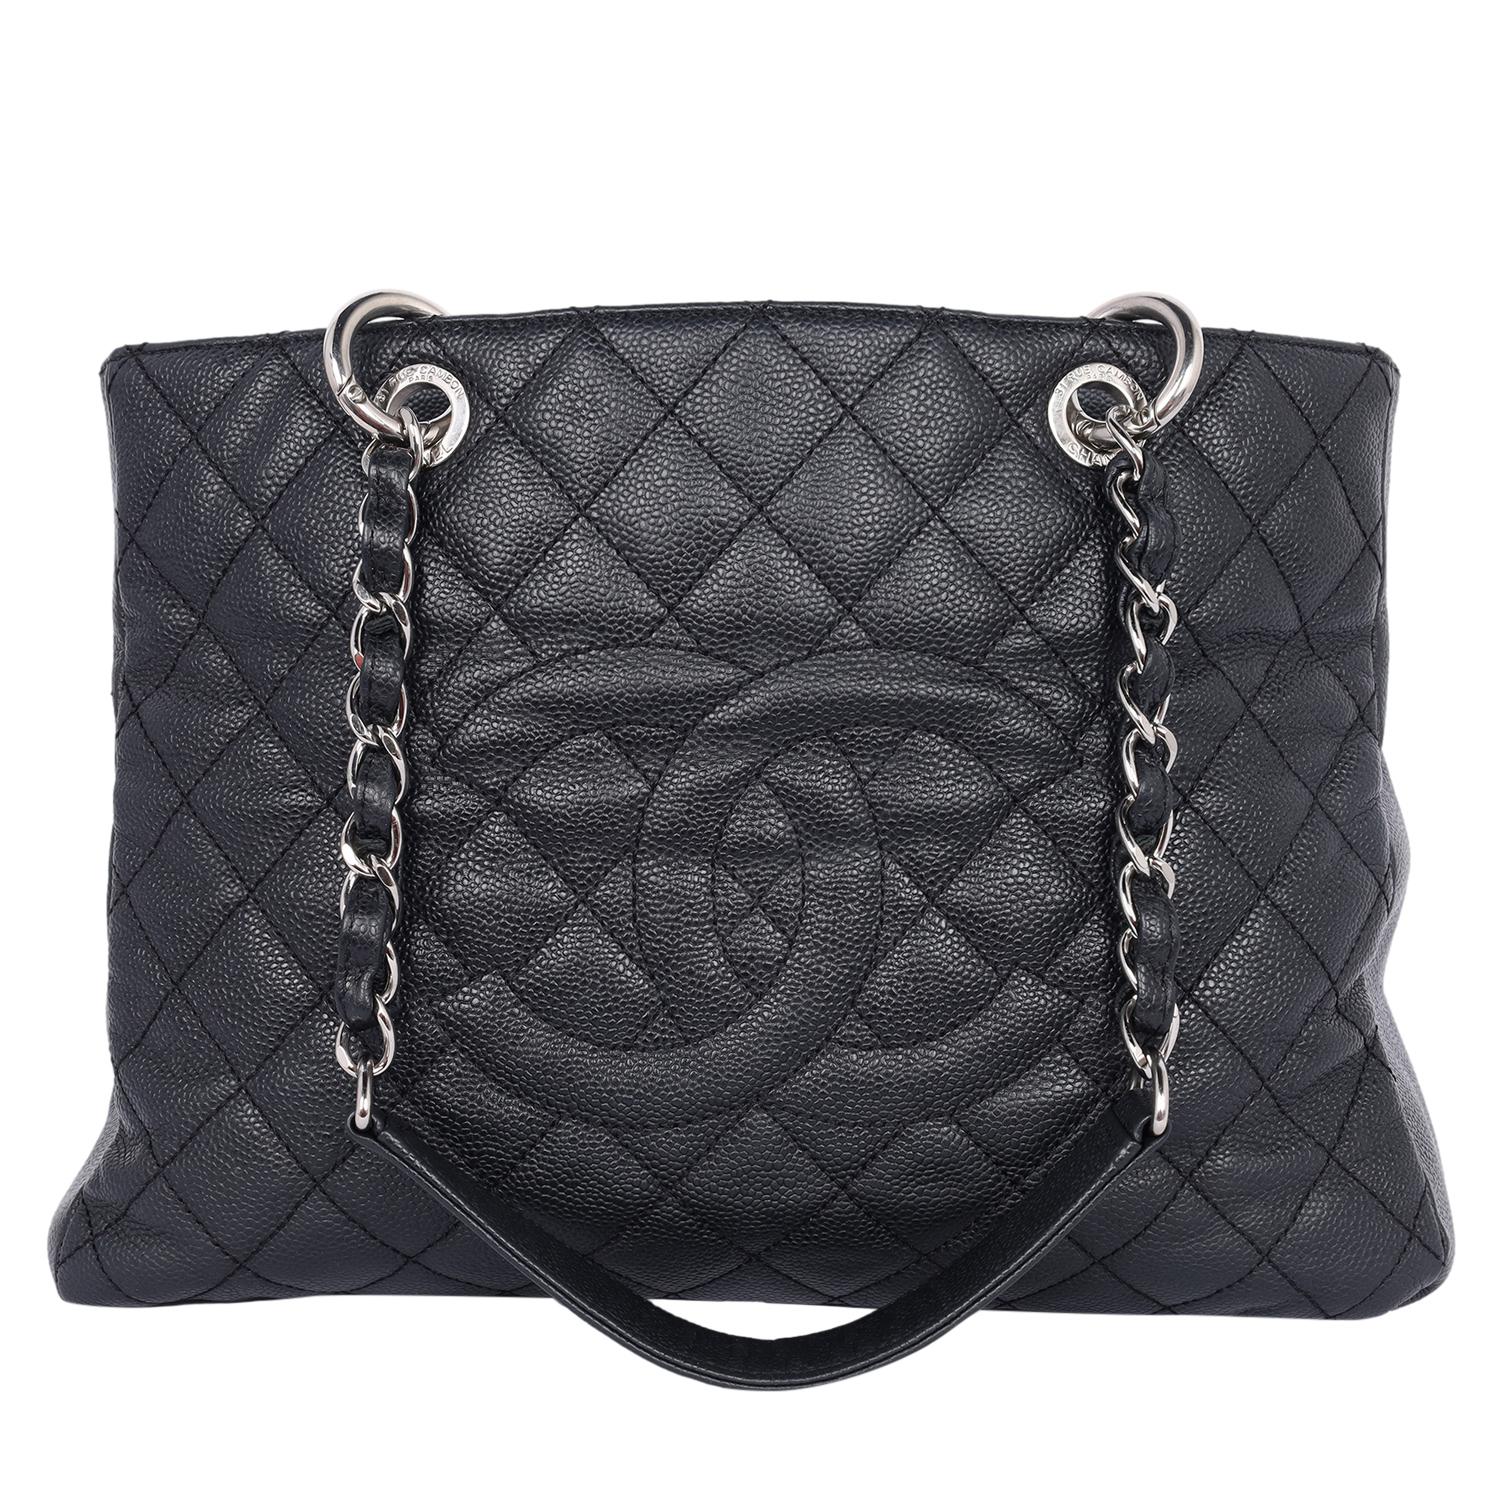 Authentic, pre-loved Chanel Caviar Quilted Grand Shopping Tote GST in Black. This amazing tote features a black diamond quilted caviar leather, Chanel CC logo on the front, and a flat pocket on the rear. The top opens to a zipper middle pocket with